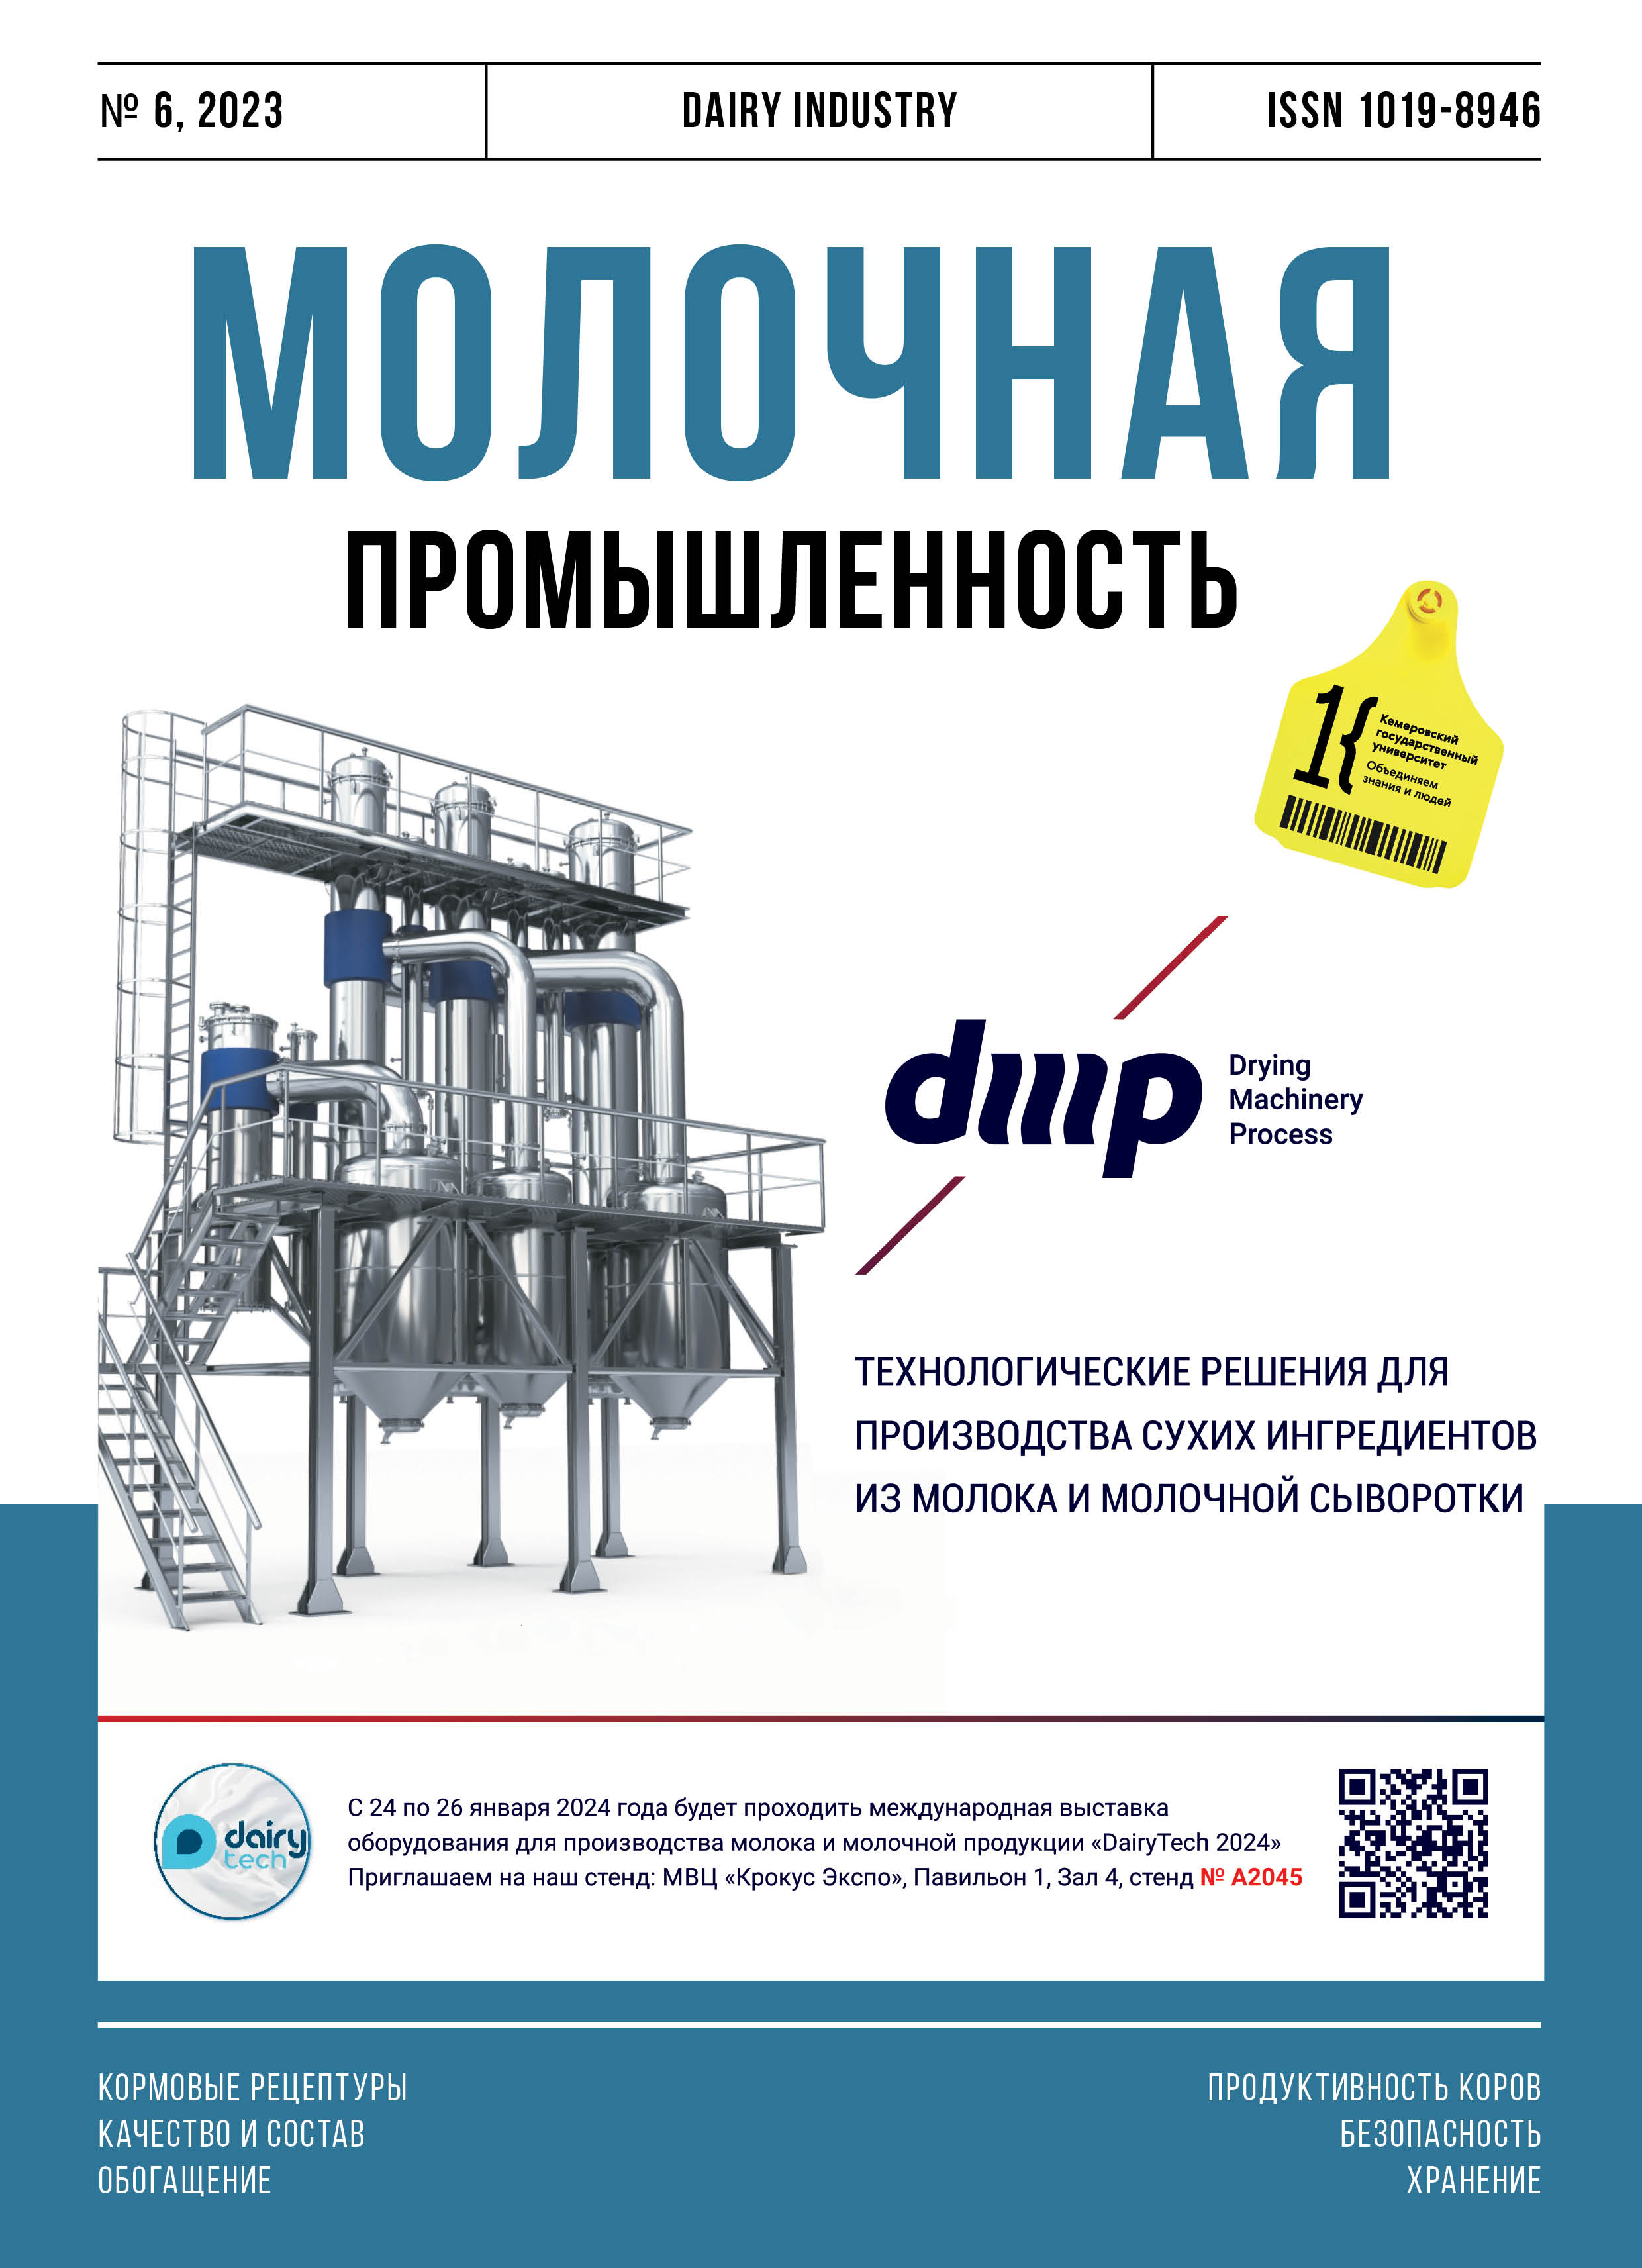                         Application of vortex emulsifier for multicomponent systems
            